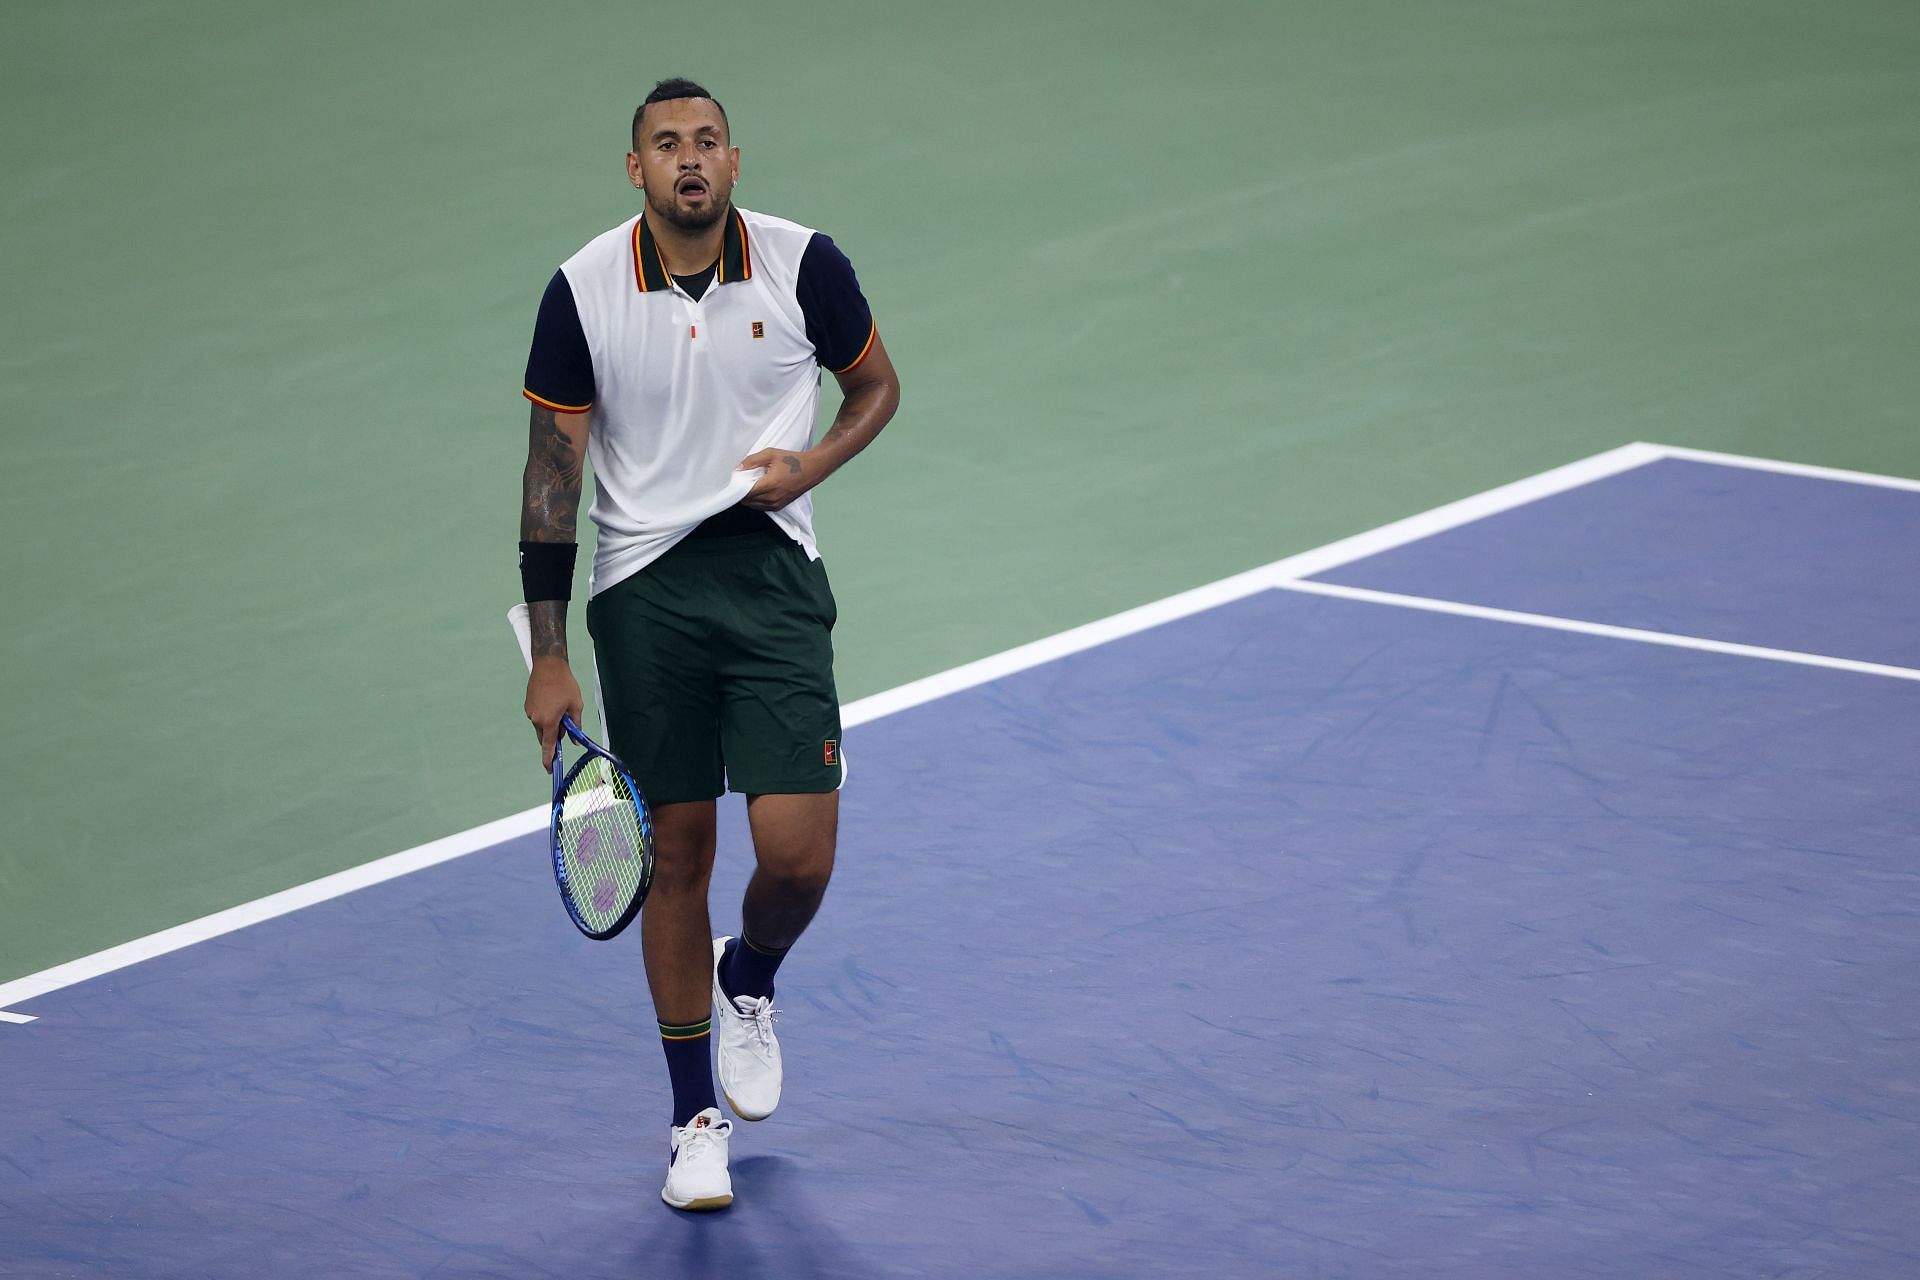 Nick Kyrgios has a rather underwhelming record at the US Open.